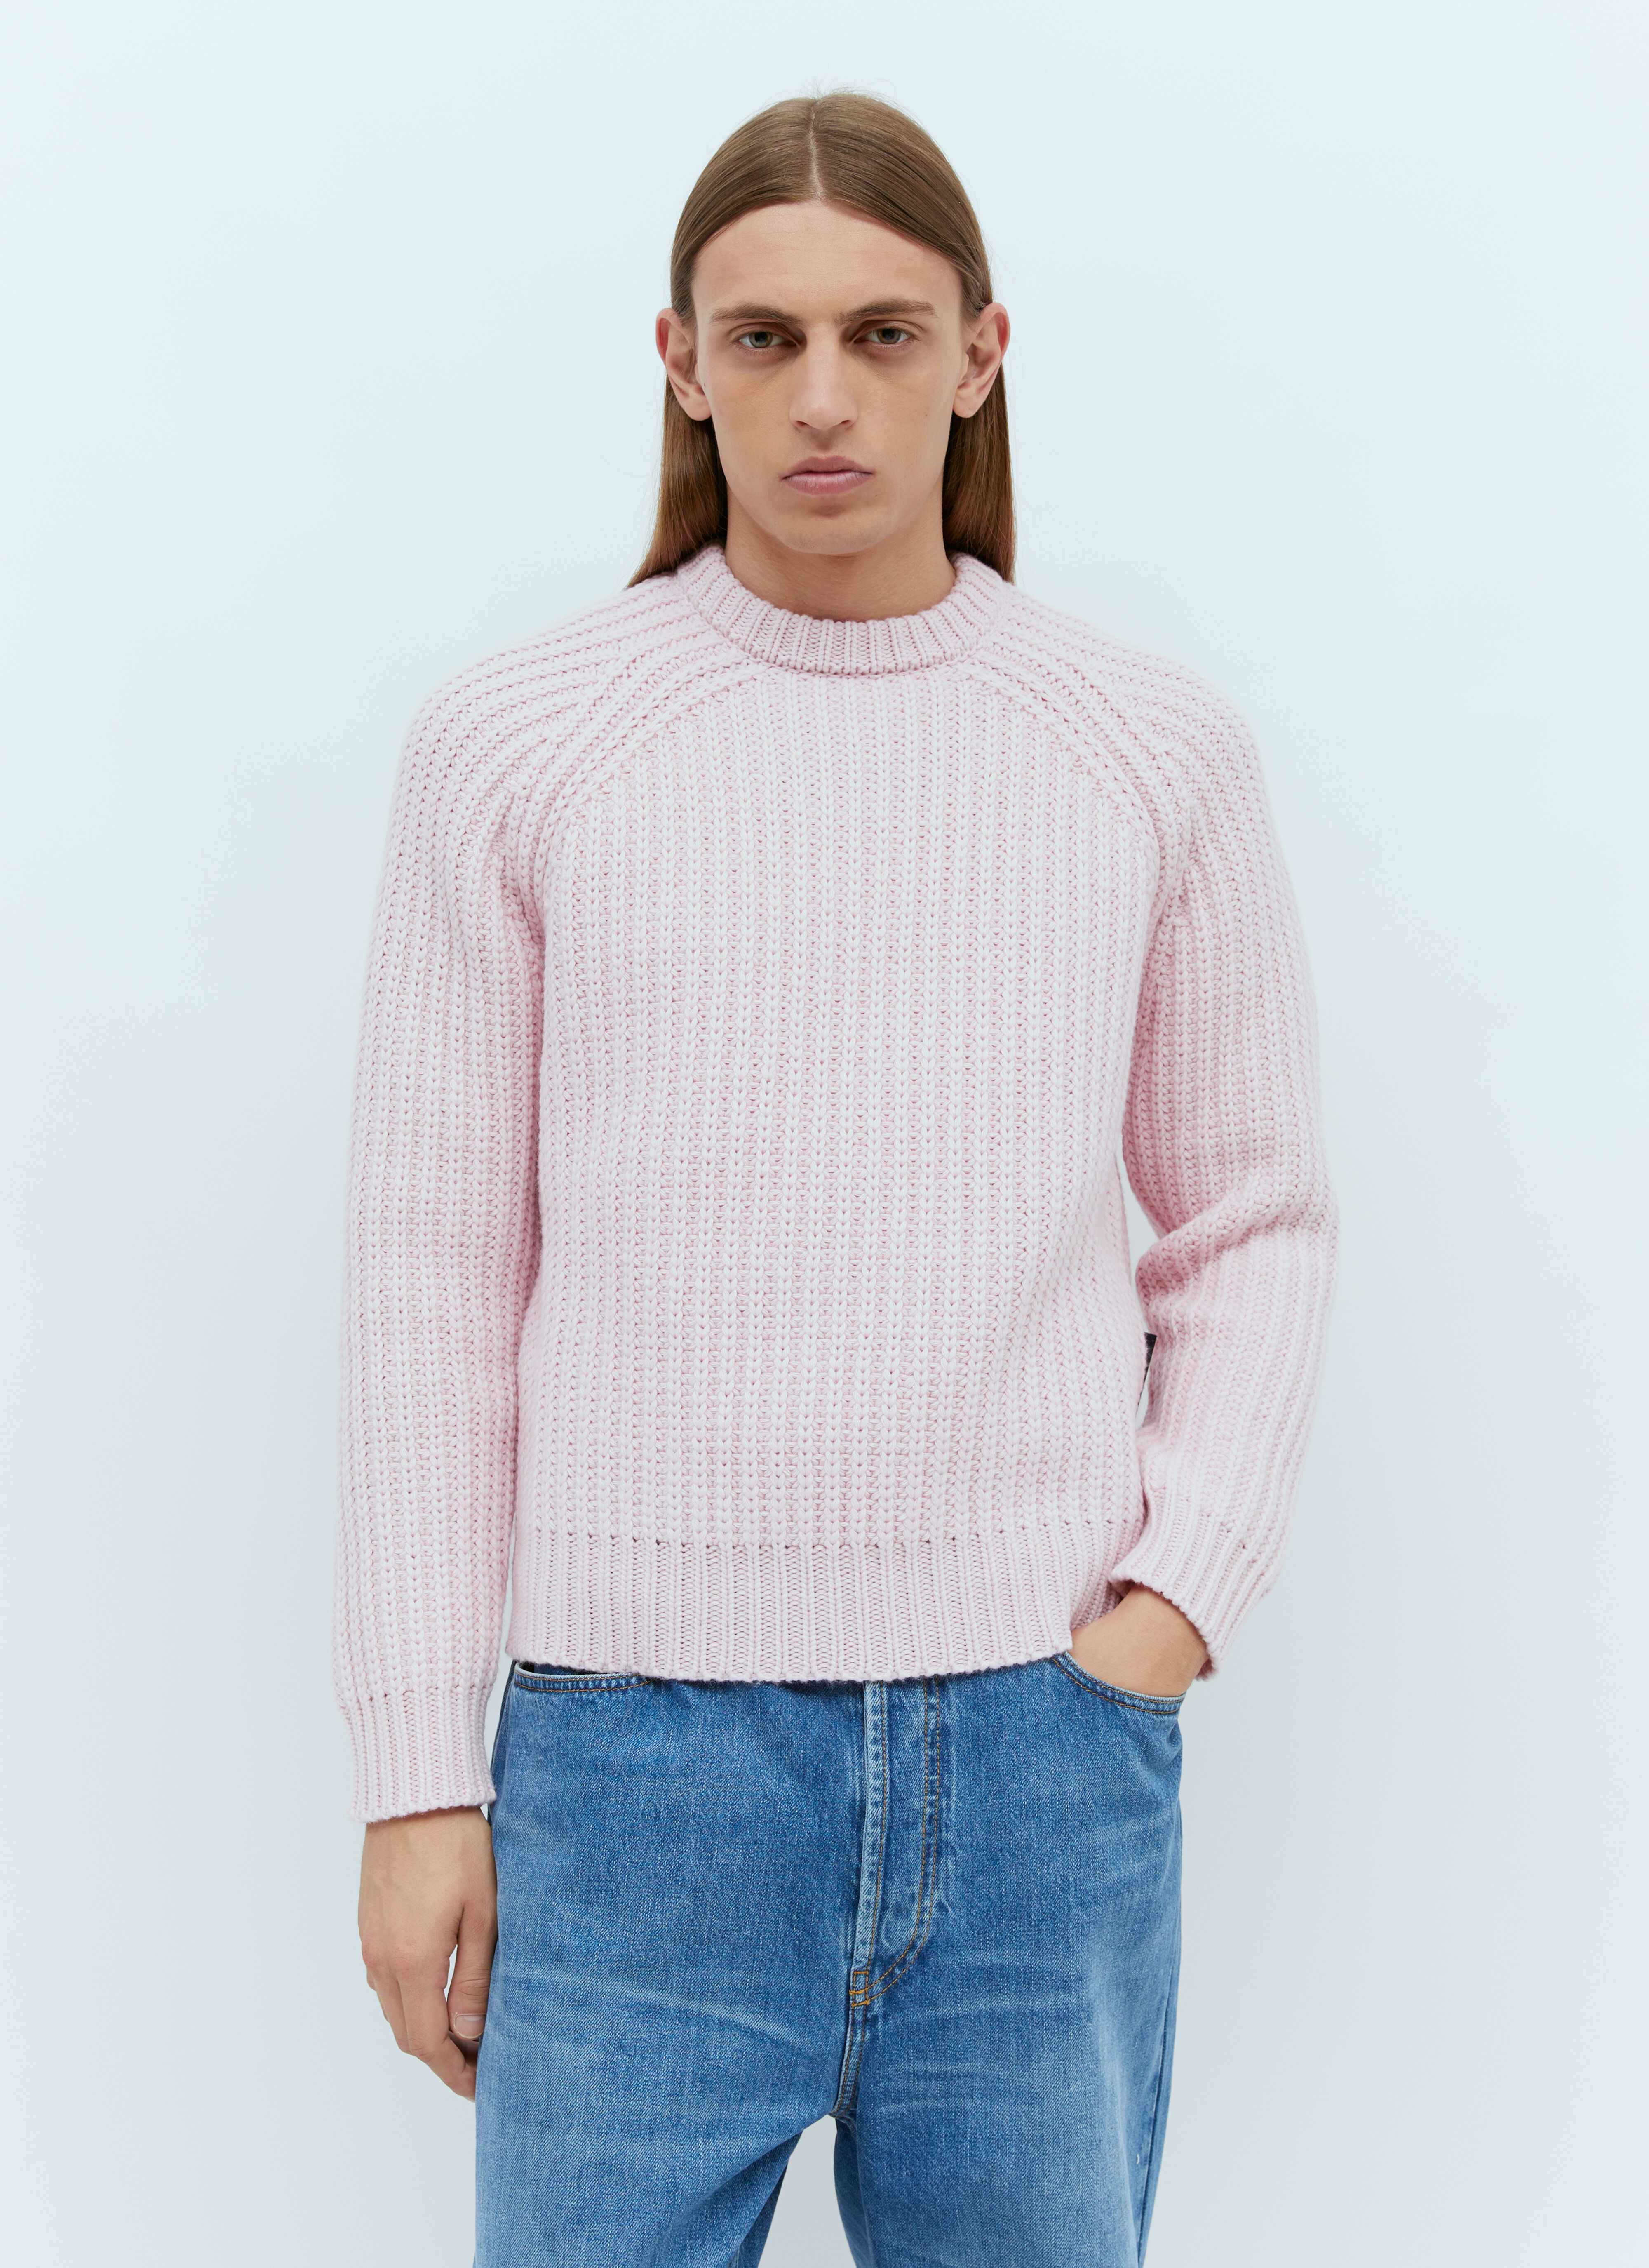 Acne Studios Wool Knit Sweater Pink acn0156004